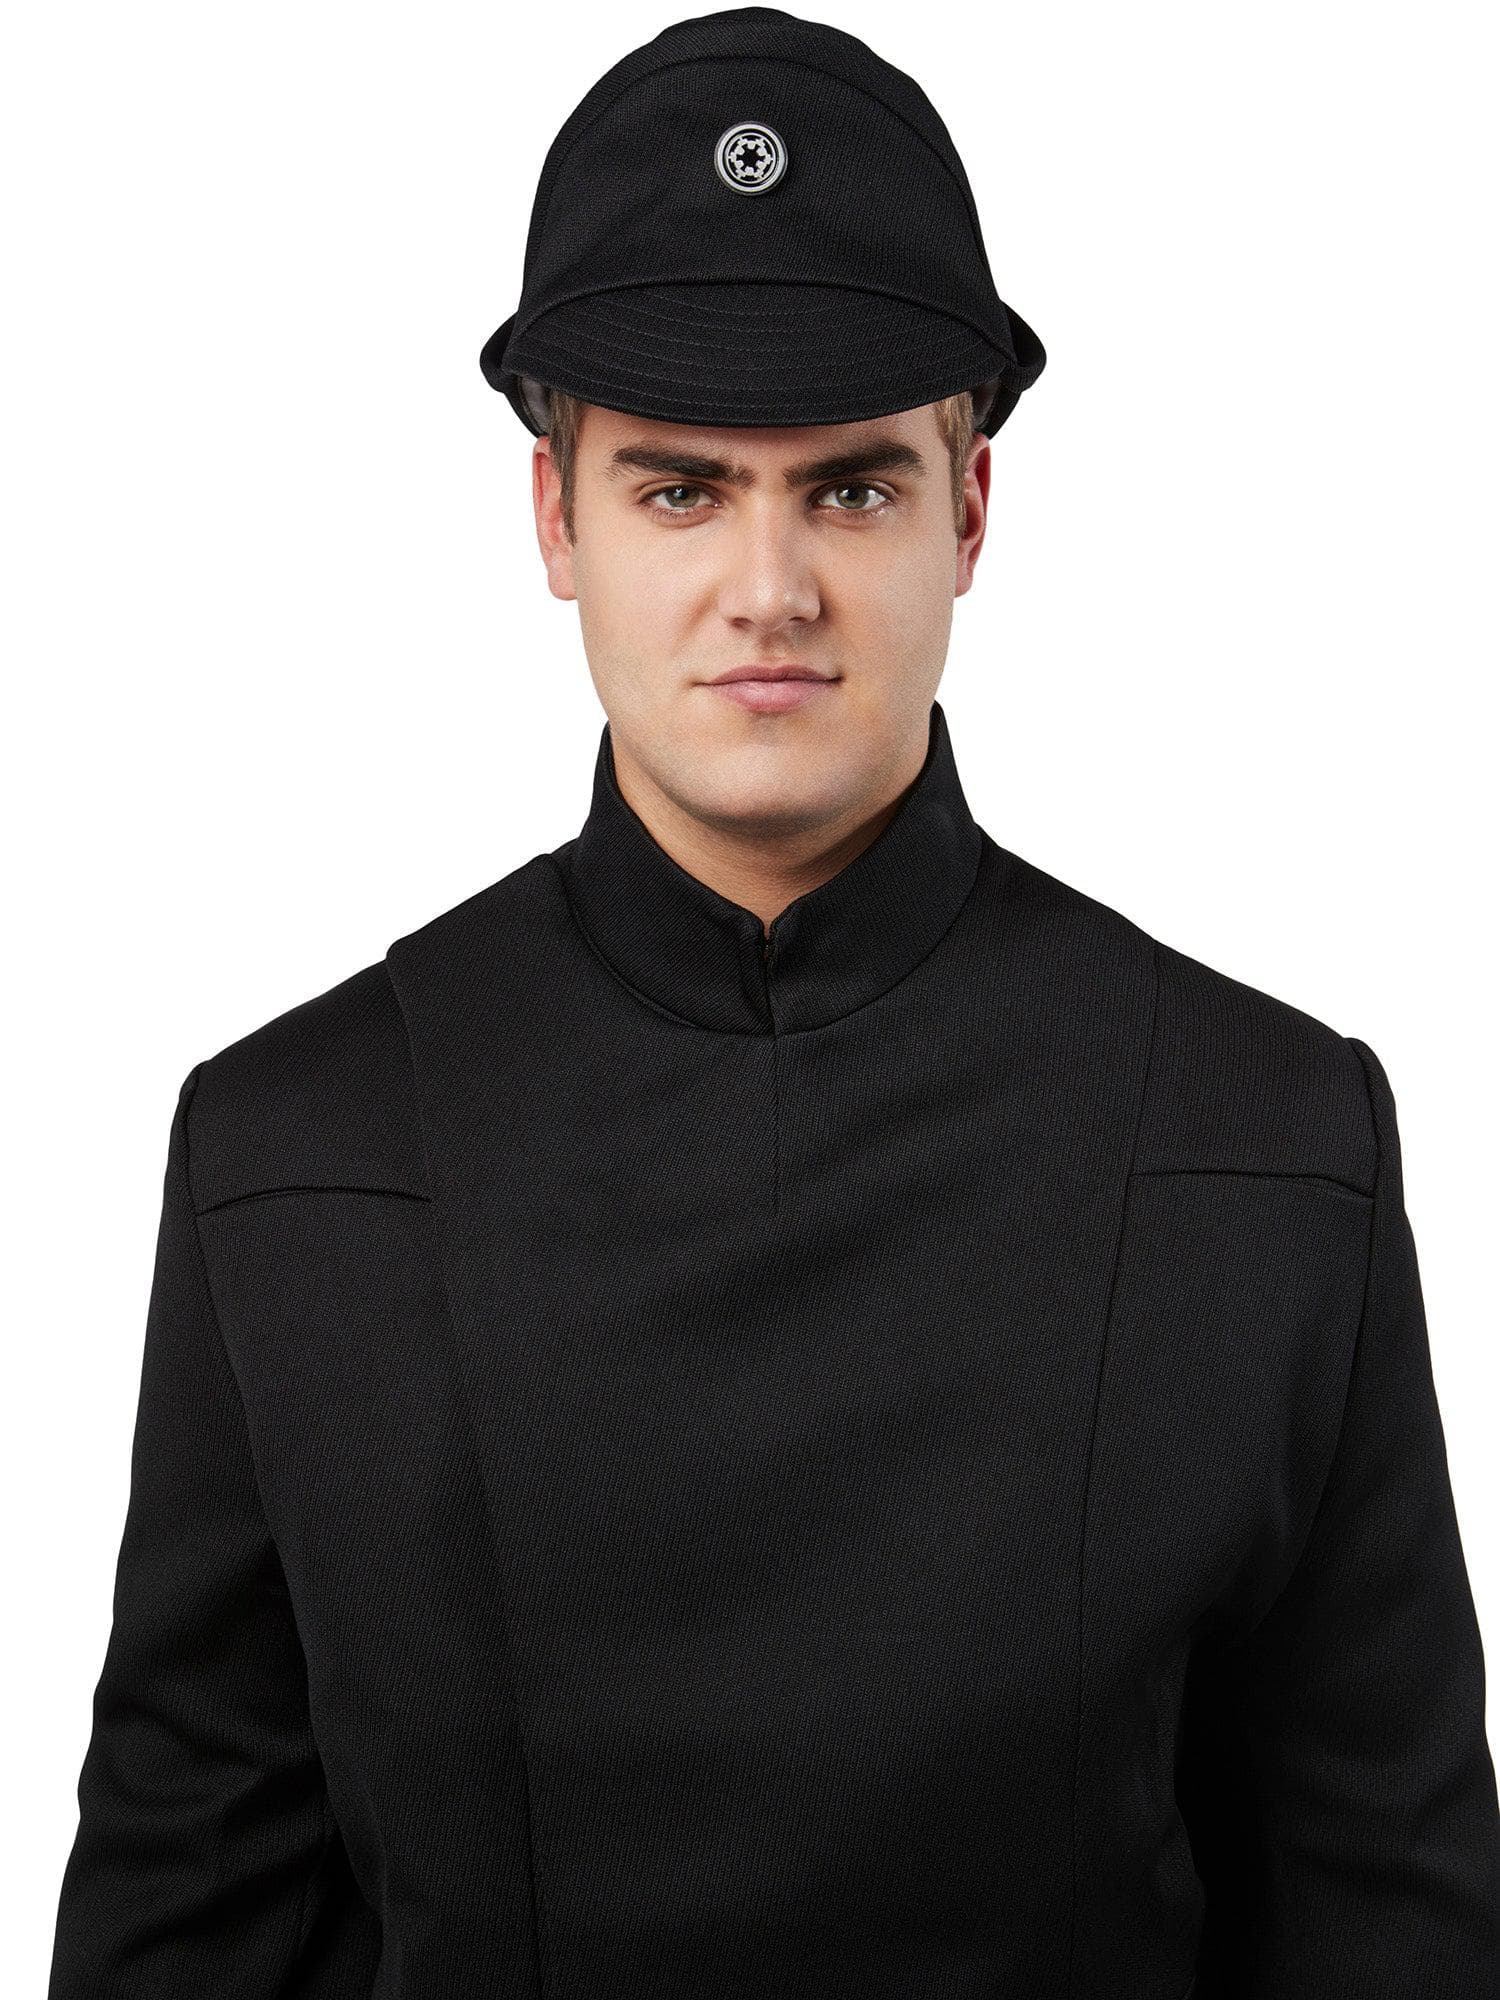 Denuo Novo - Star Wars: Imperial Officer Black Tunic Costume Accessory - costumes.com